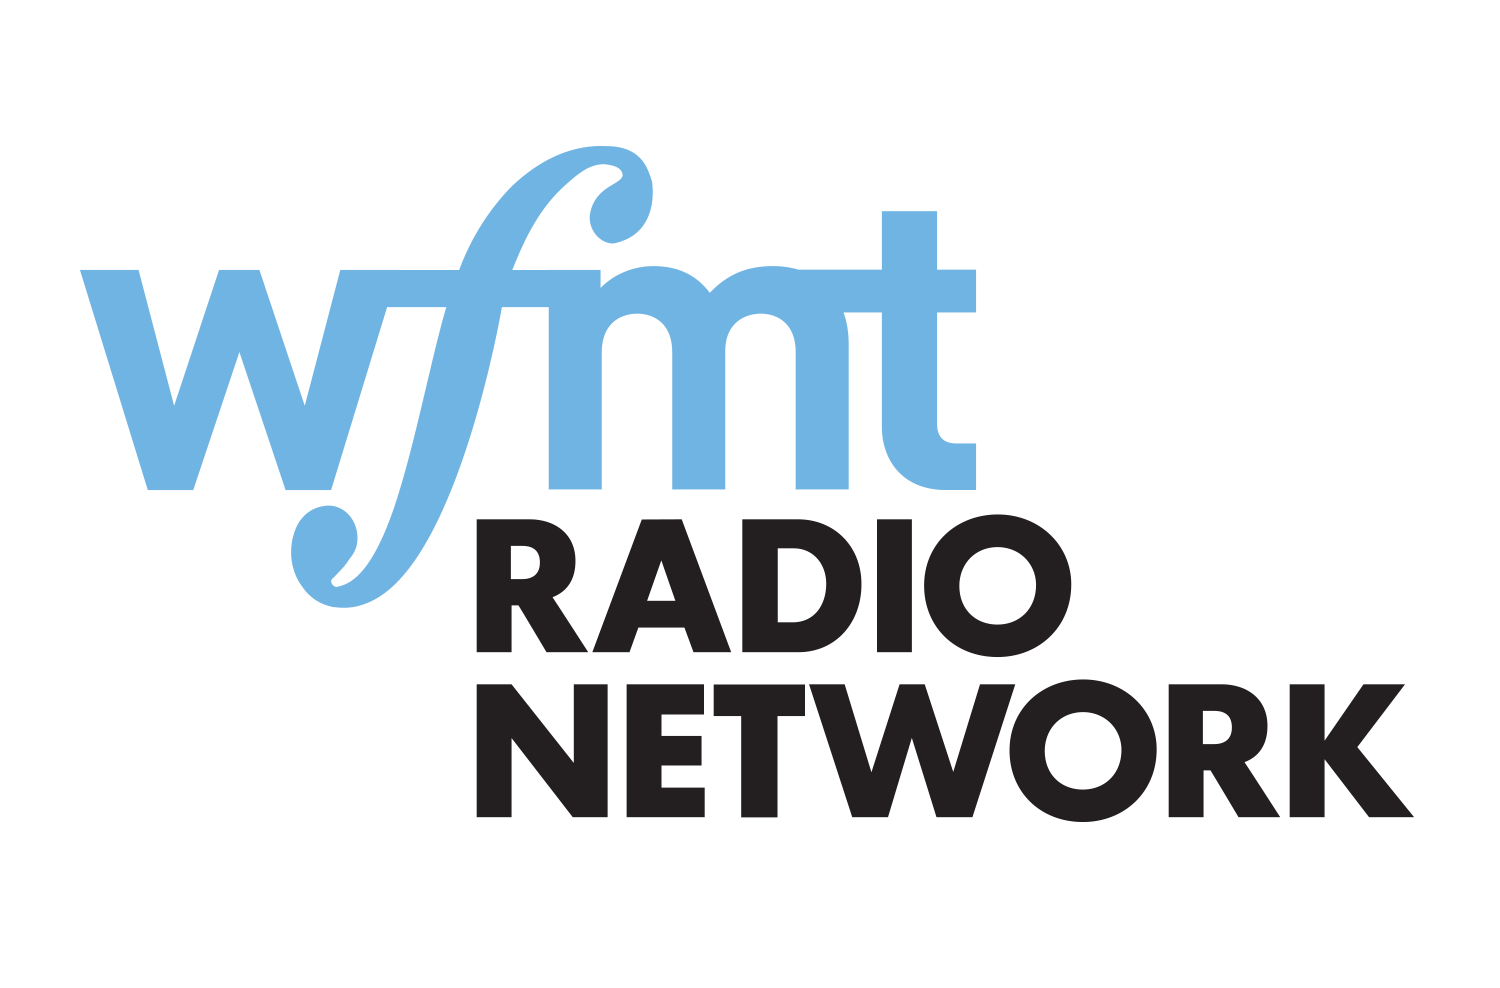 The WFMT Radio Network's Stories on PRX